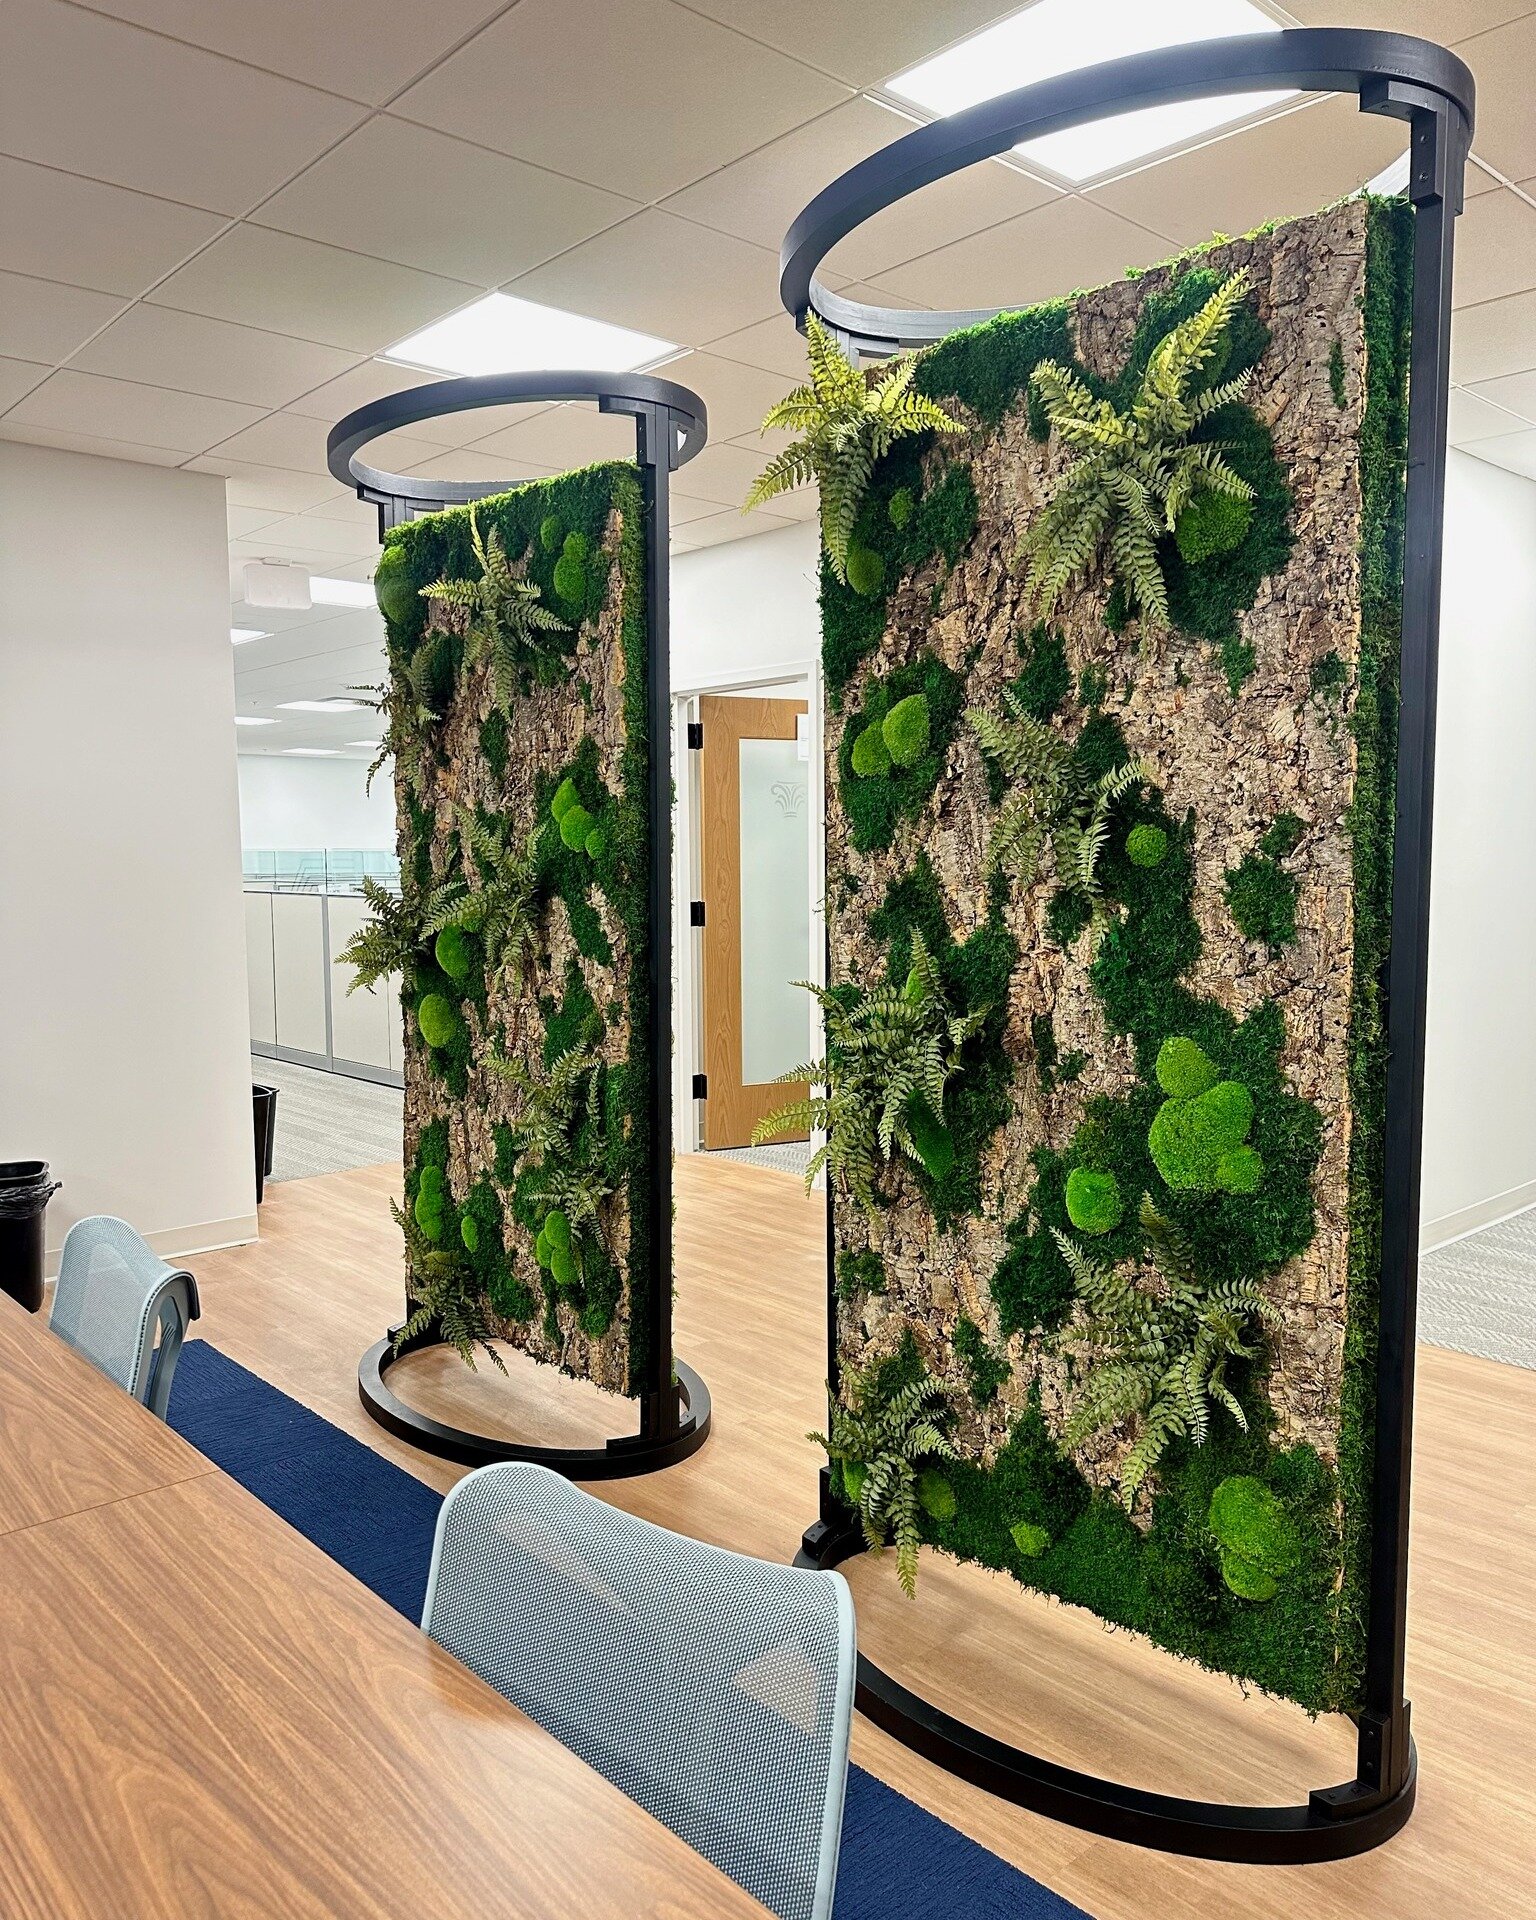 Sparking creativity and energy; these double sided floating nature partitions are the perfect way to break up any space while reconnecting with nature! 🌿

#naturedesign #barkandmoss #naturepartition #mossart #plantdesign #naturedecor #interiorplantw